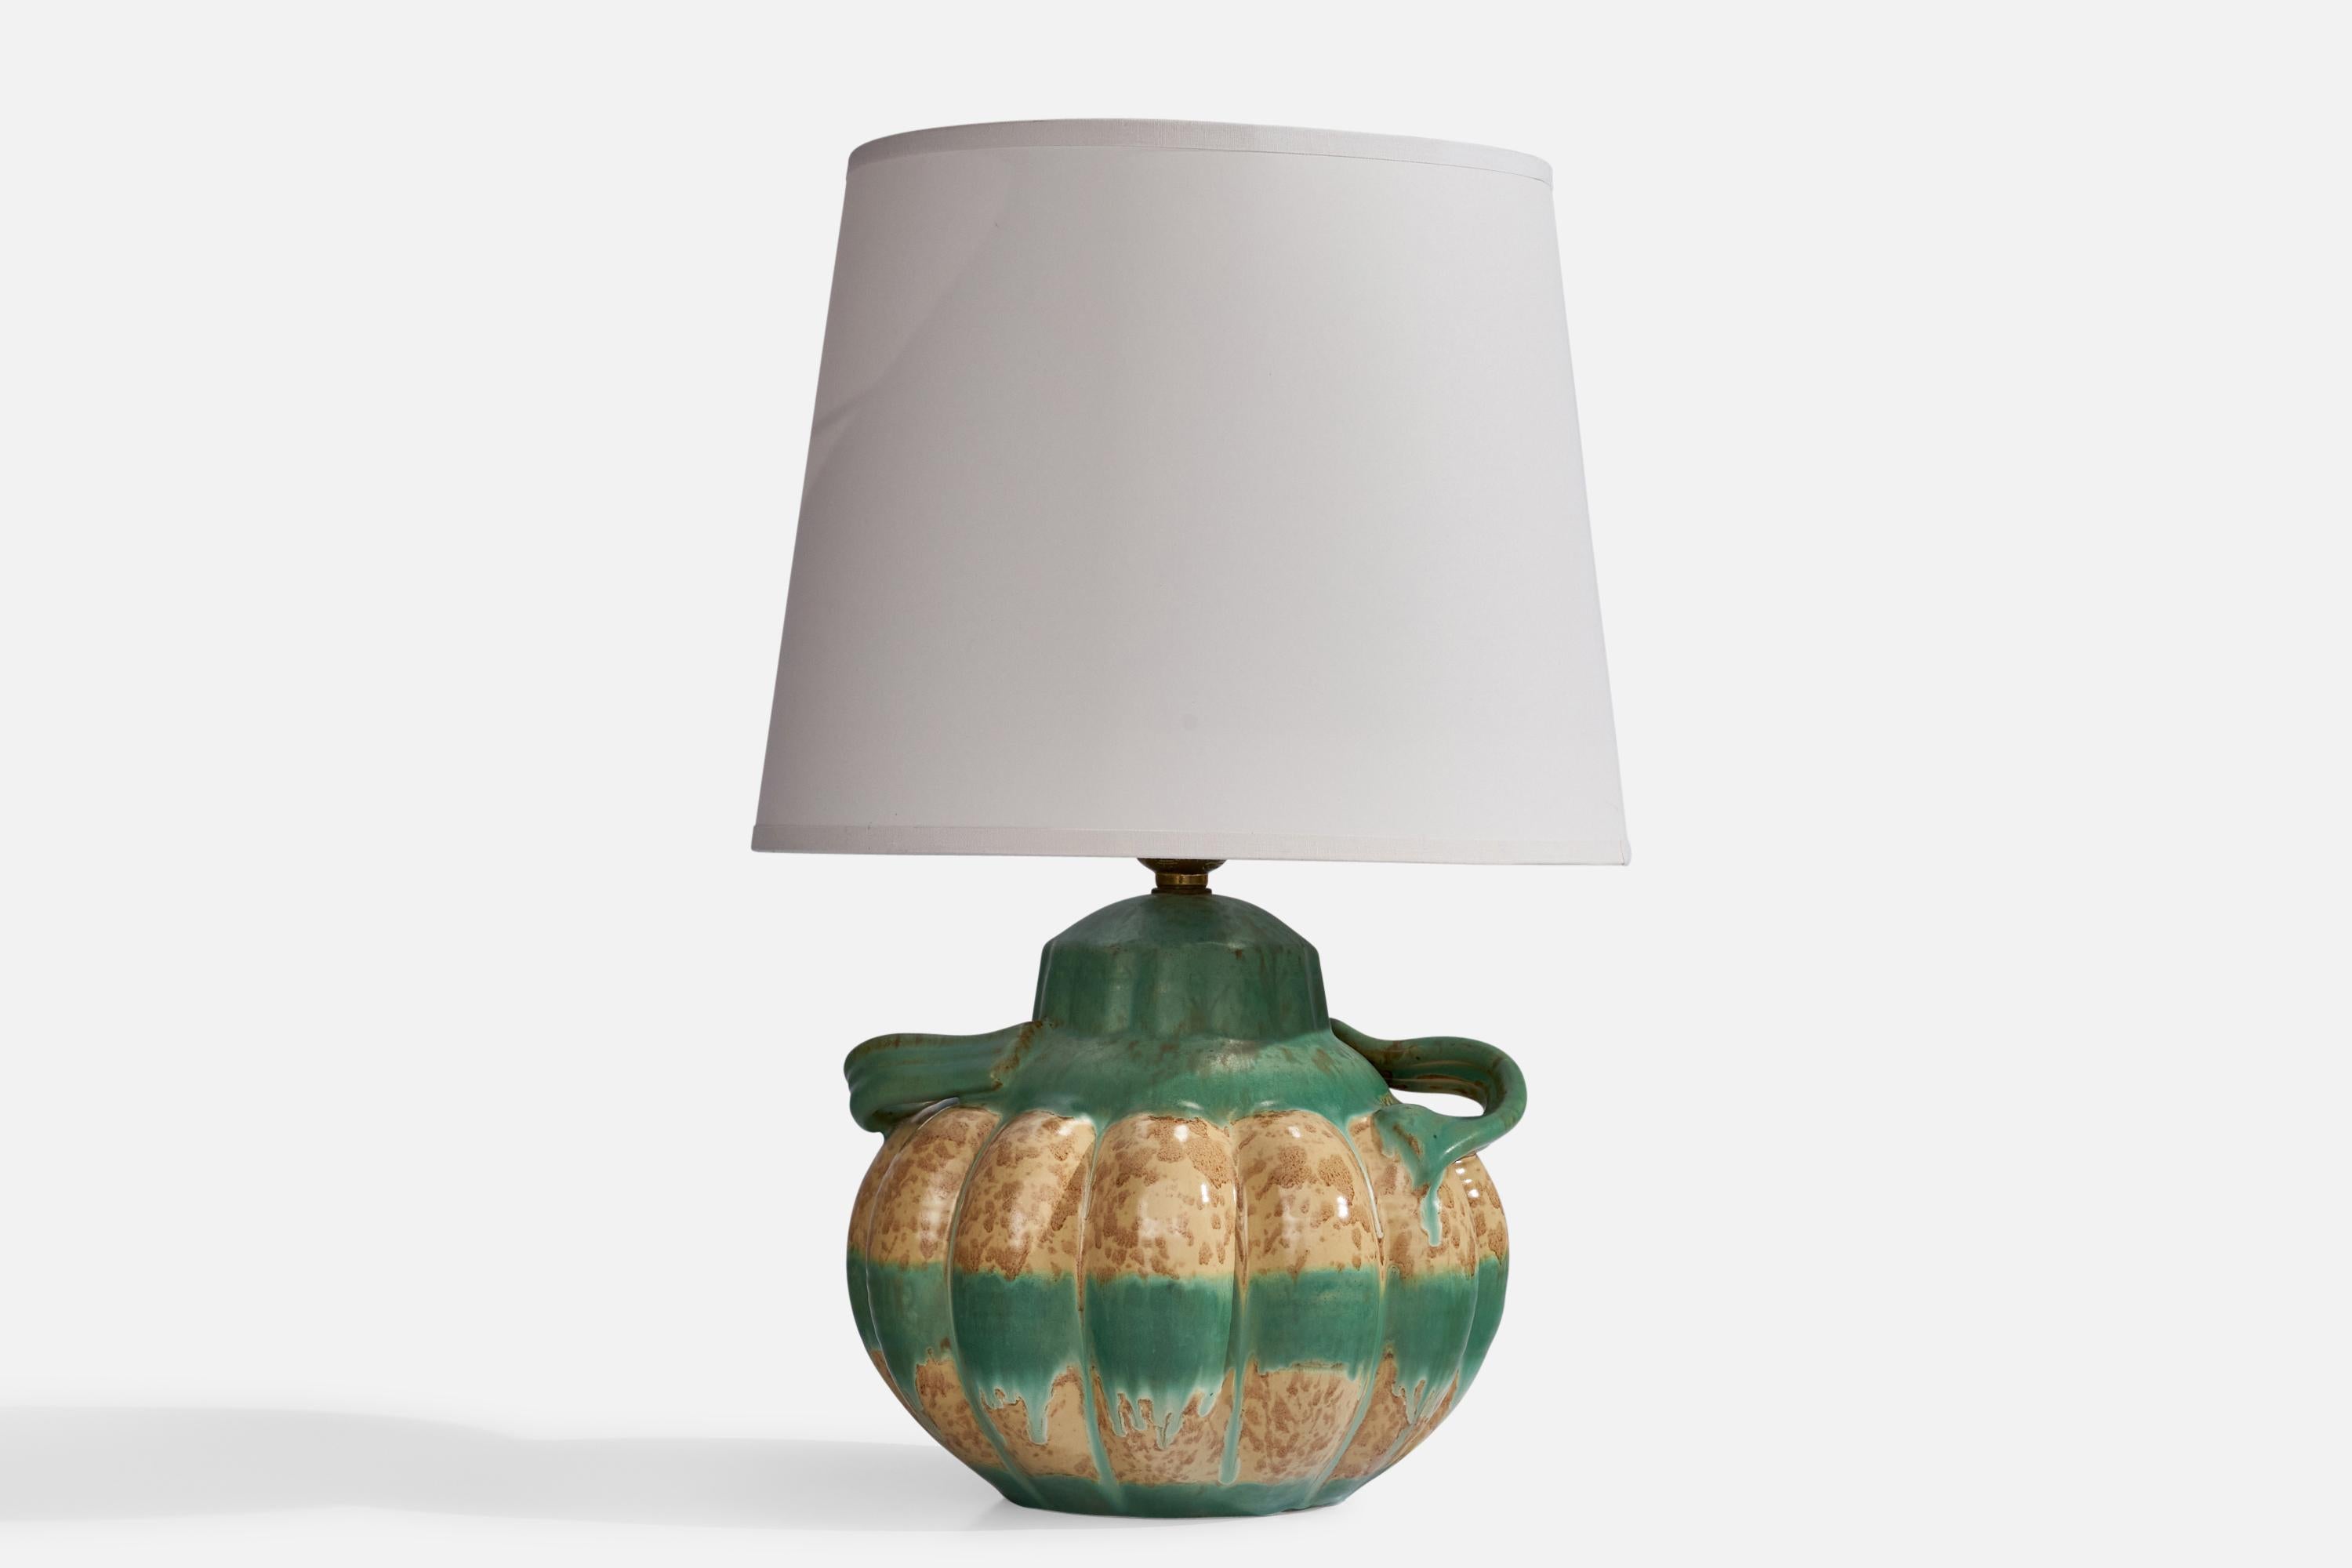 A green and beige-glazed earthenware table lamp designed and produced by Upsala Ekeby, Sweden, 1930s.'

Dimensions of Lamp (inches): 9.8” H x 8” W x 7” Depth
Dimensions of Shade (inches): 8” Top Diameter x 10” Bottom Diameter x 8” H
Dimensions of